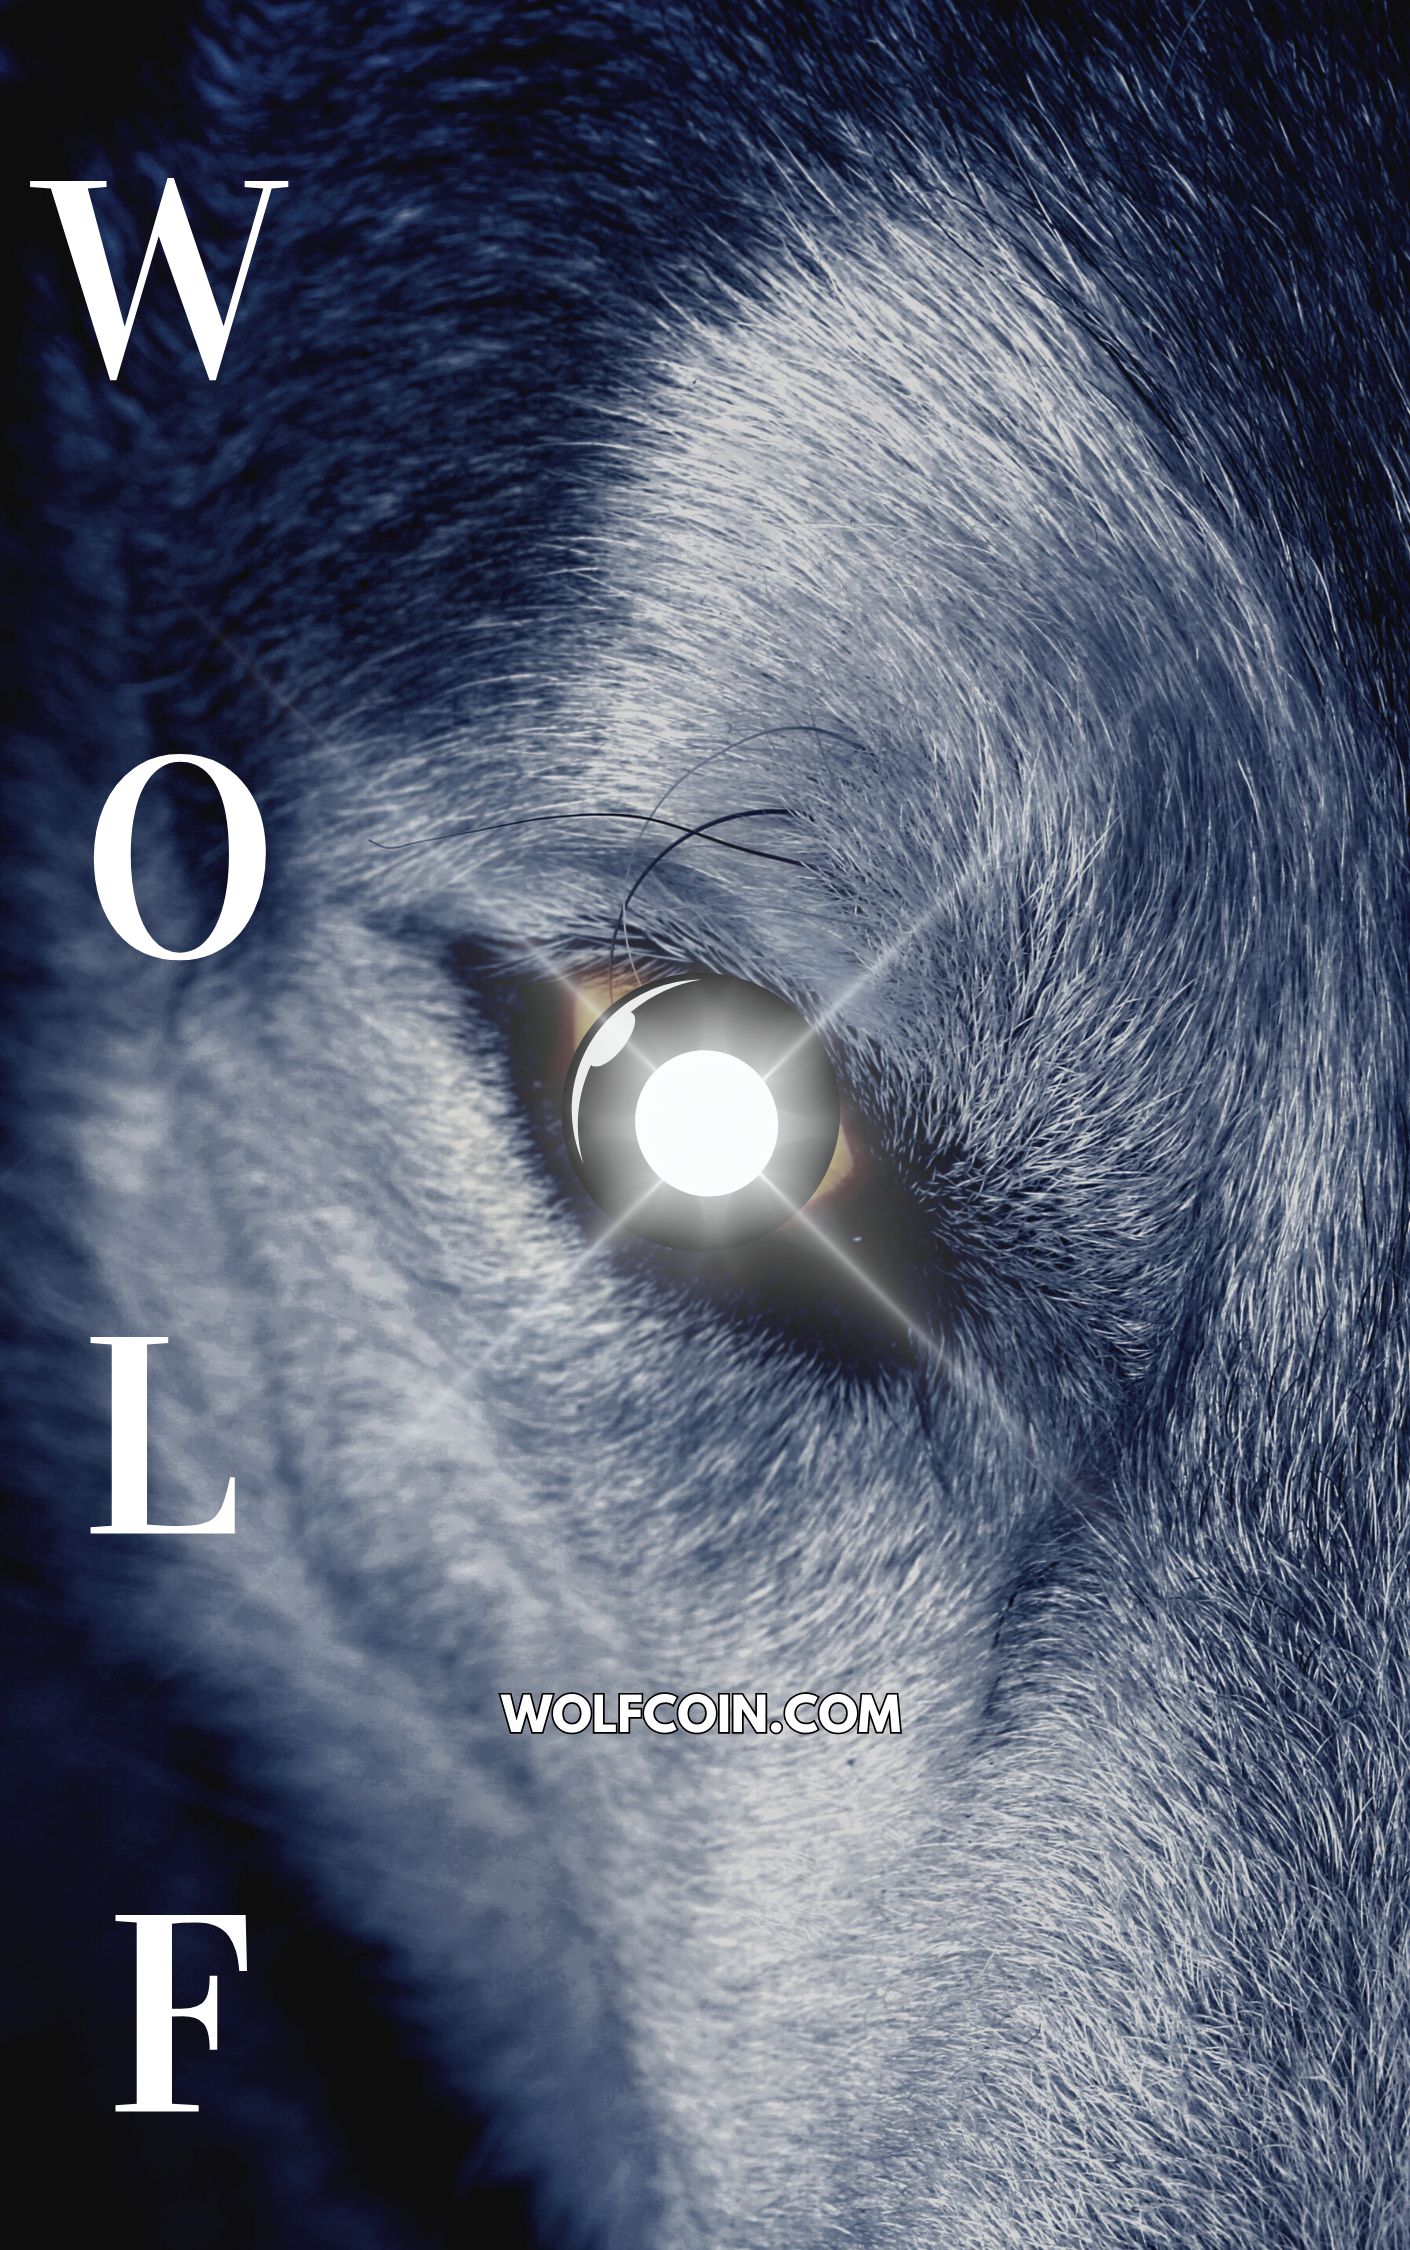 Wolf Eye Photo ThrillerMystery Book Cover (1).png.jpg